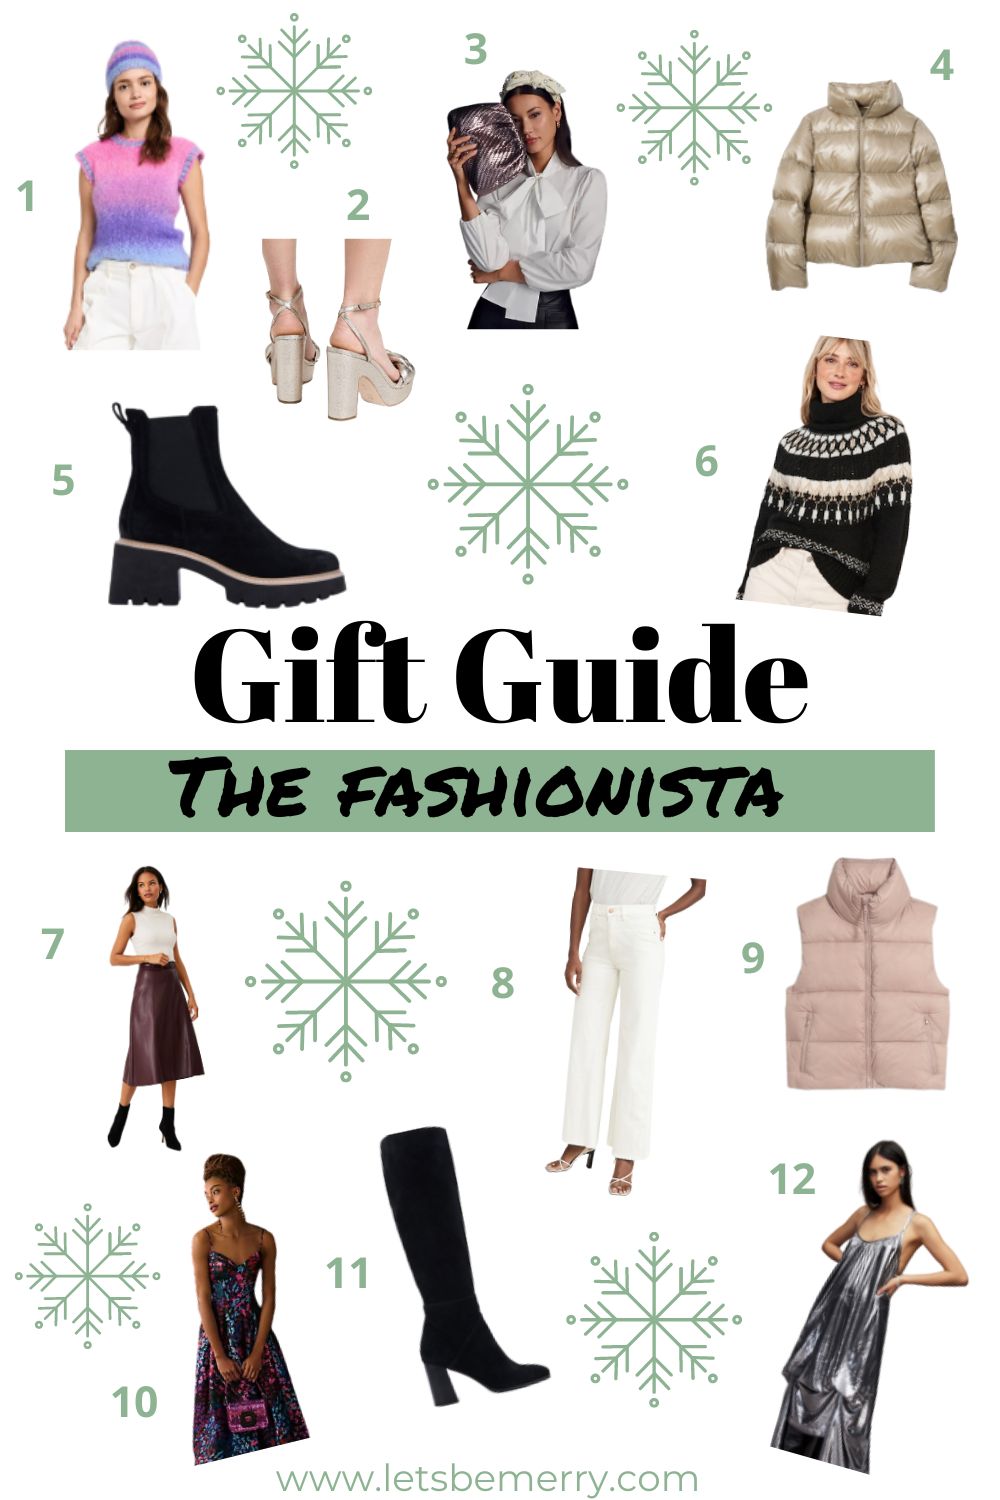 https://letsbemerry.com/wp-content/uploads/2022/12/holiday-2022-Gift-Guide-for-the-fashionista.jpg